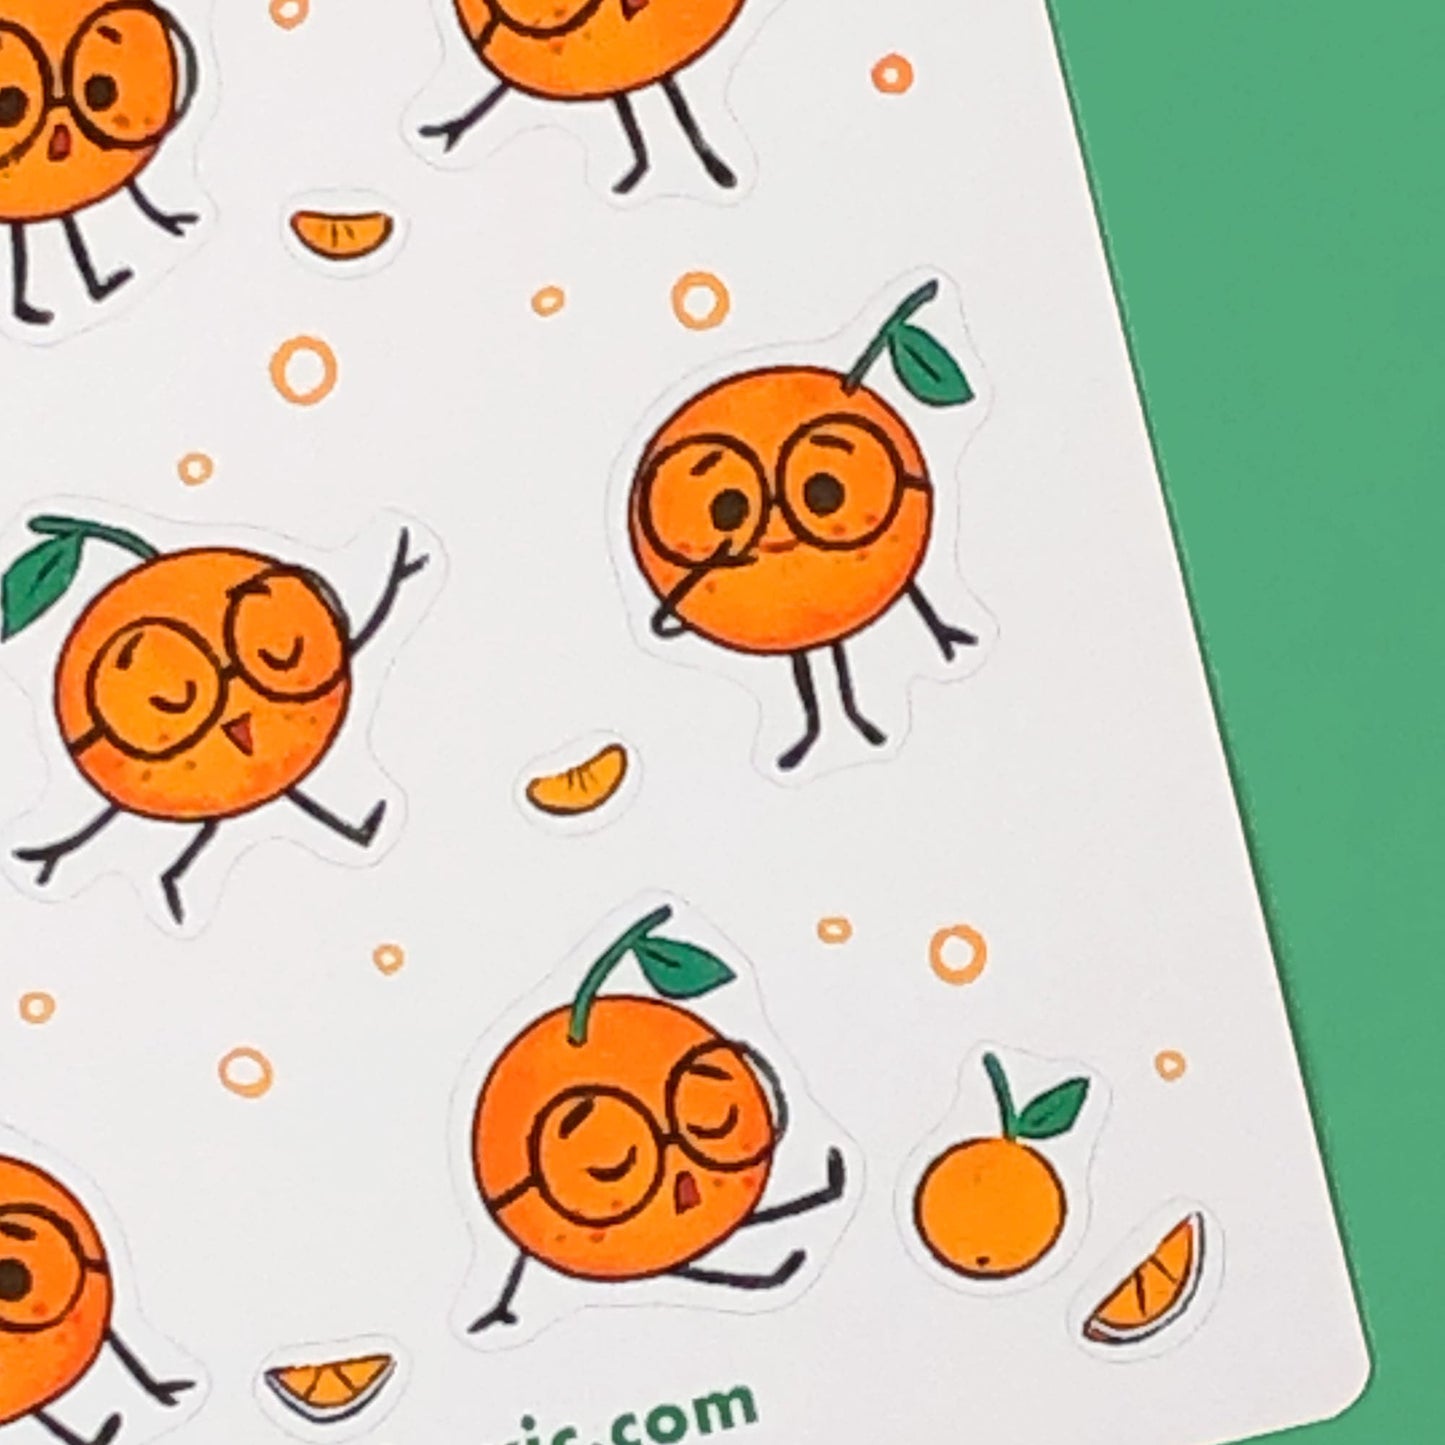 Whimsical fruity oranges stickers.